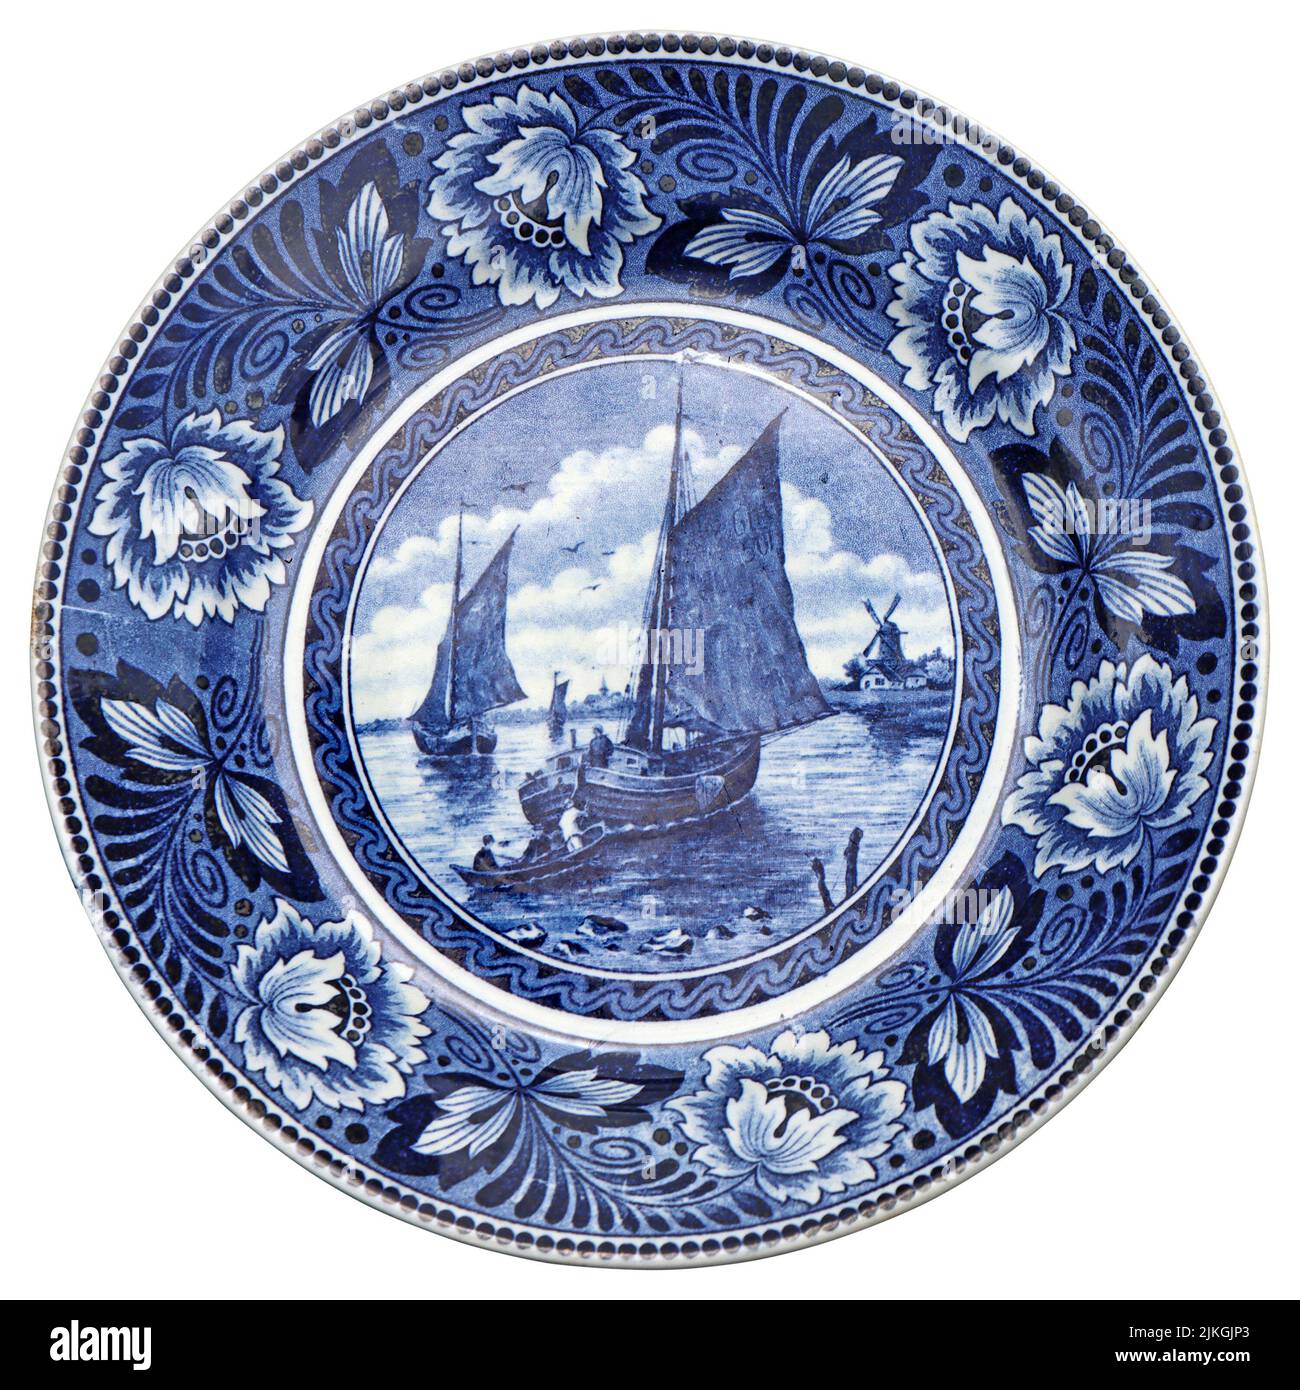 Old Blue and white ceramic plate with Dutch motifs as a souvenir Stock Photo